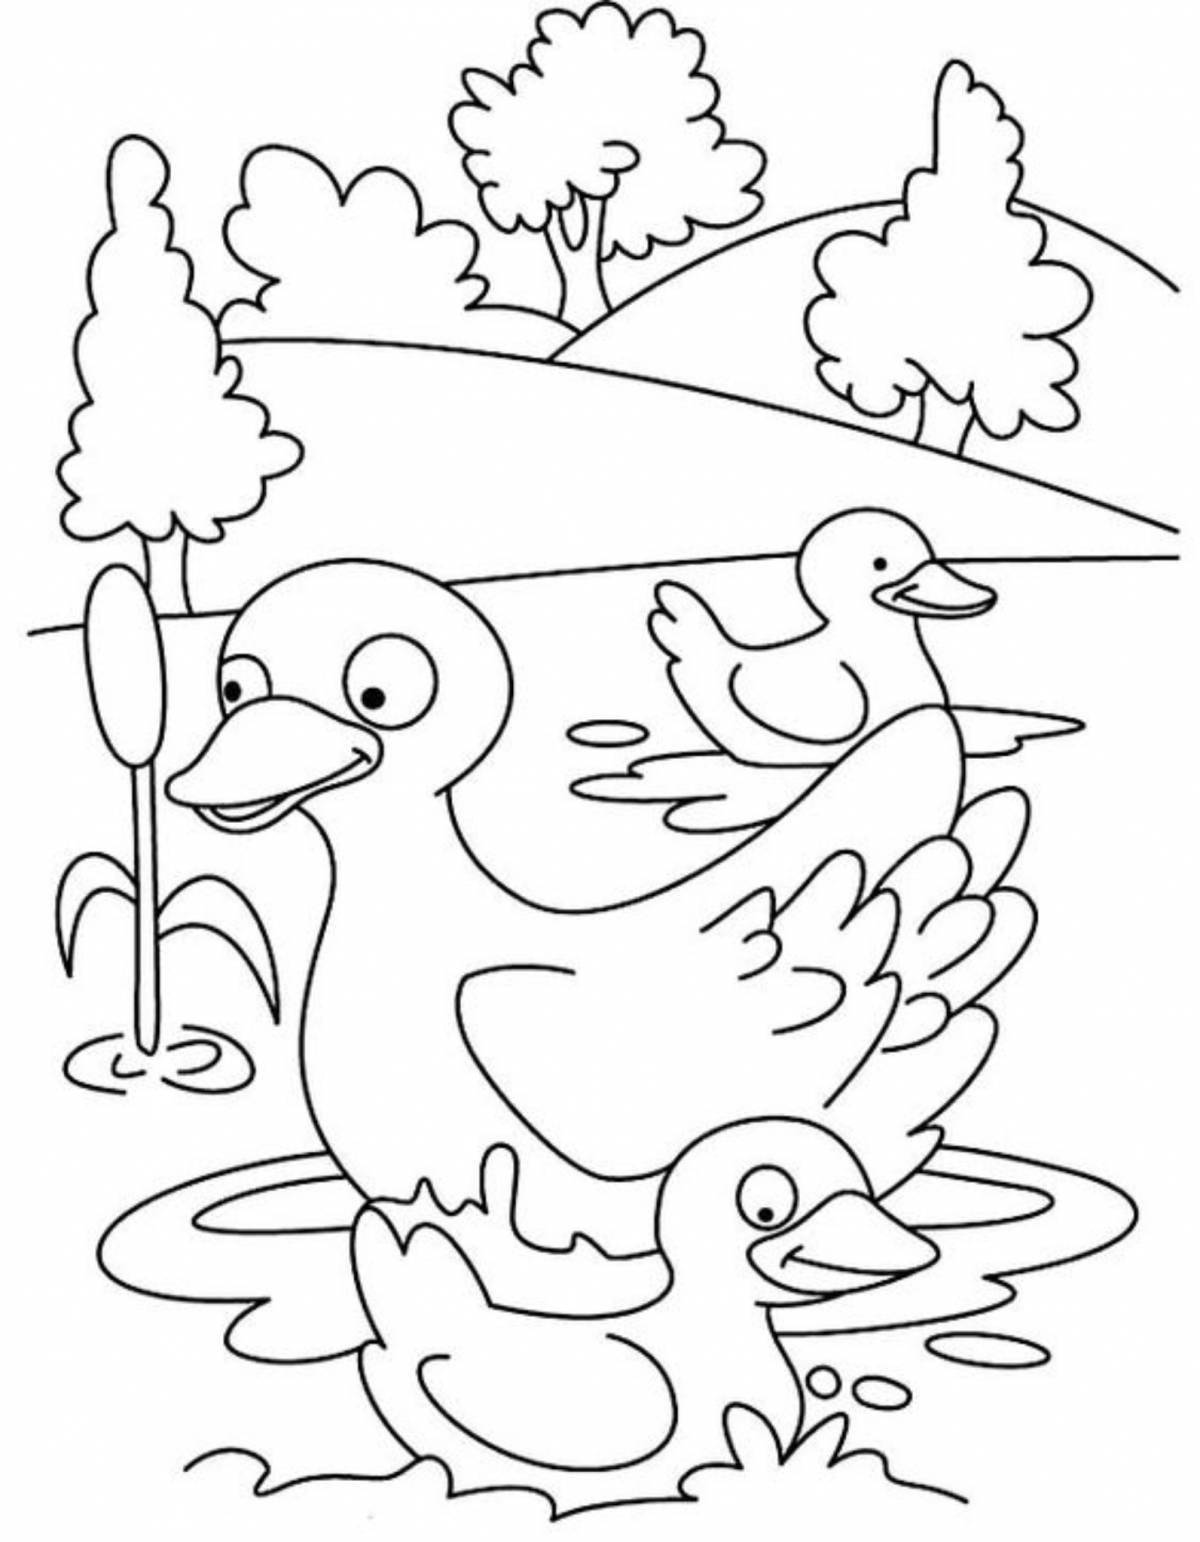 Live duck coloring